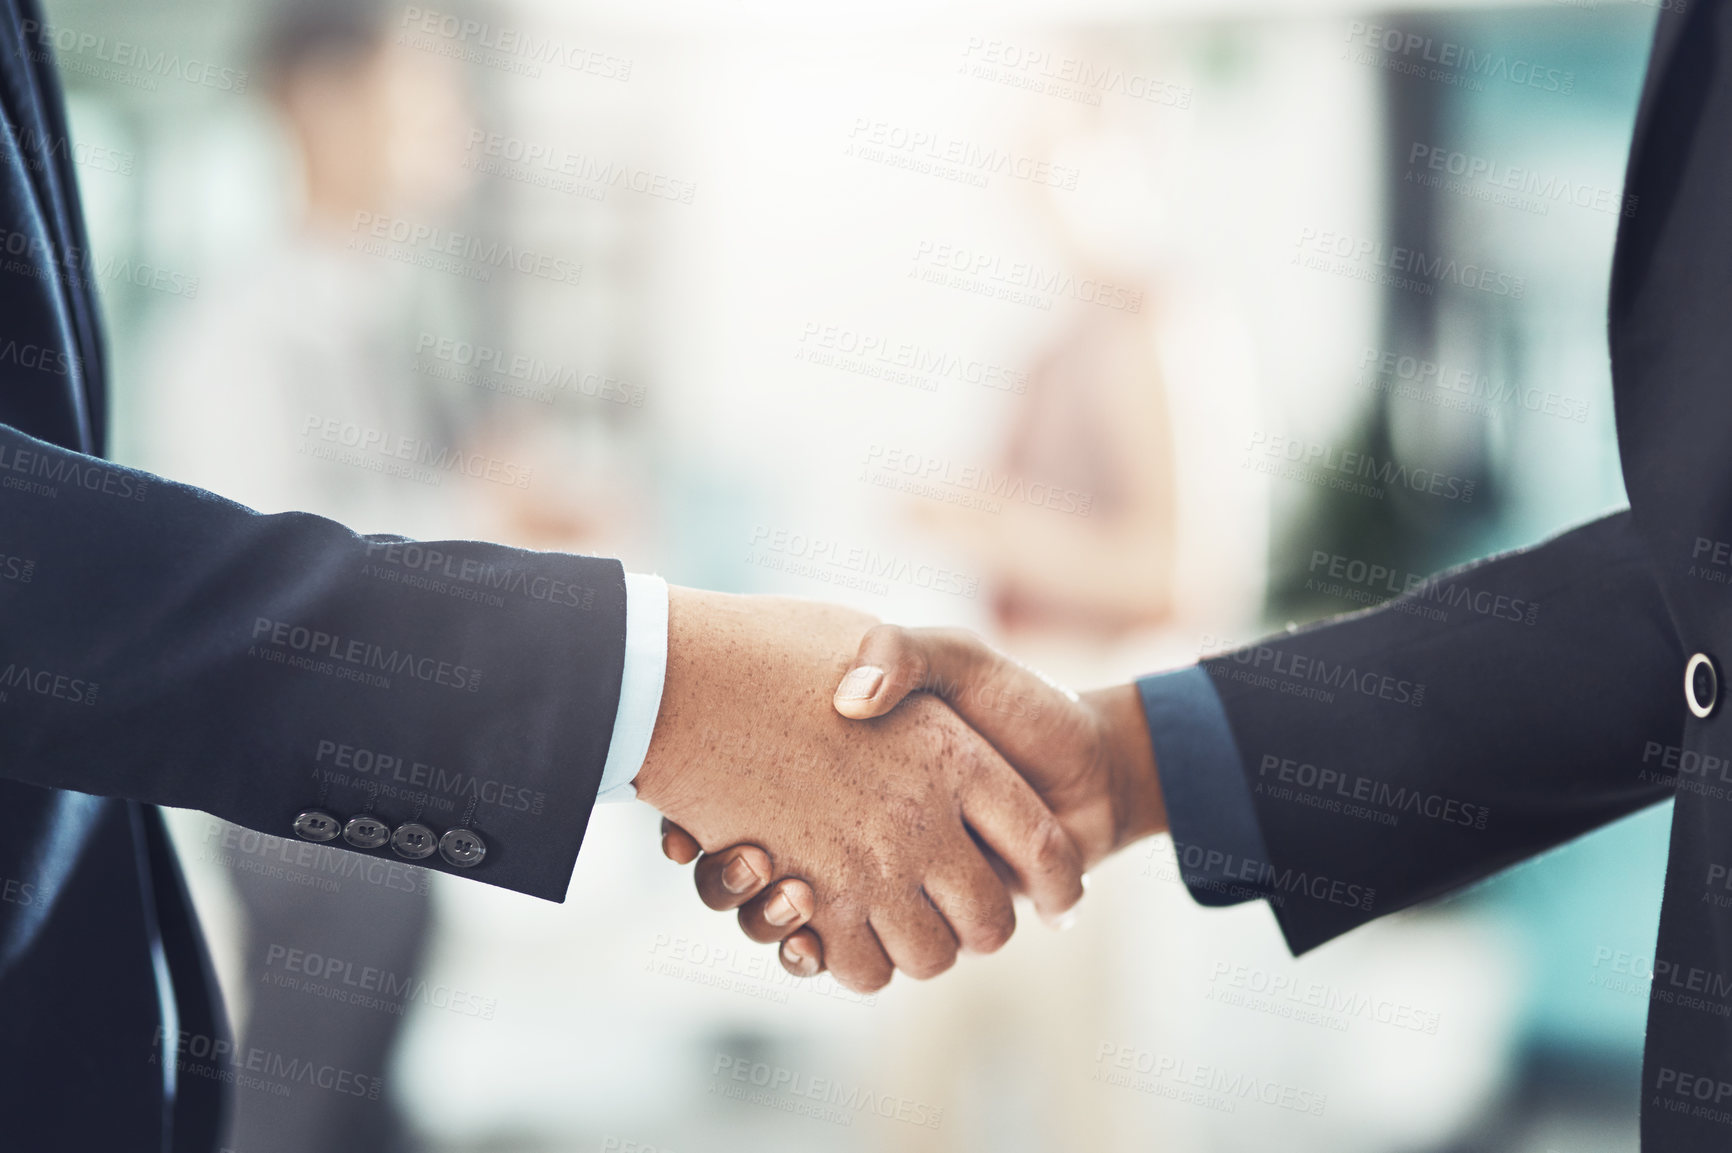 Buy stock photo Business people, handshake and meeting for hiring, partnership or deal in b2b agreement at office. Businessman shaking hands for recruitment or corporate growth in teamwork, welcome or introduction